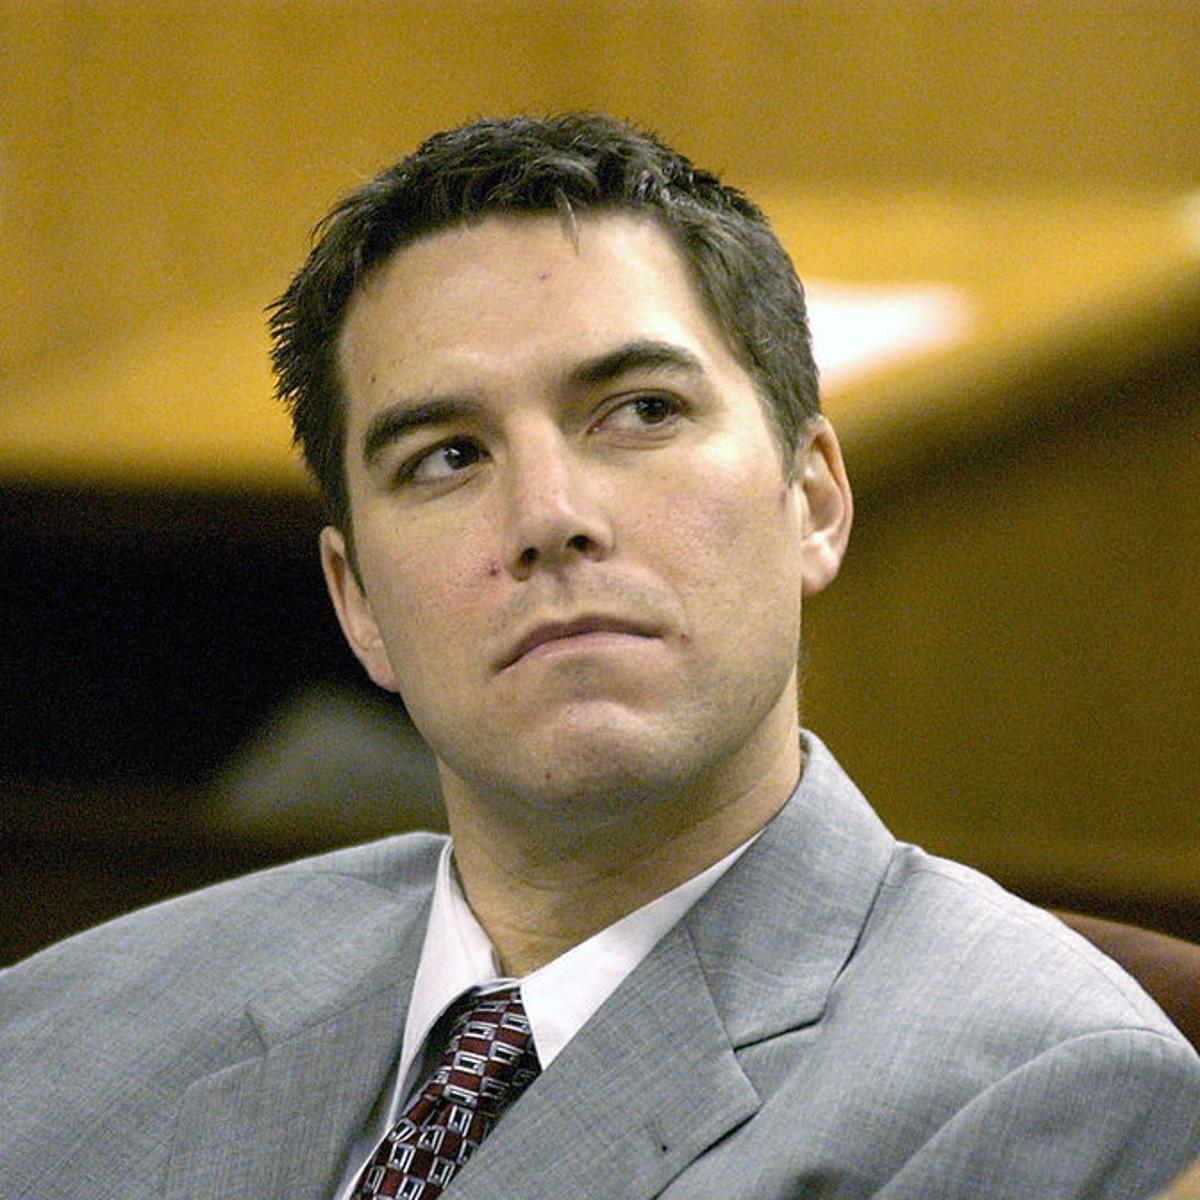 Is Scott Peterson innocent? Discover how he could walk free in 2020